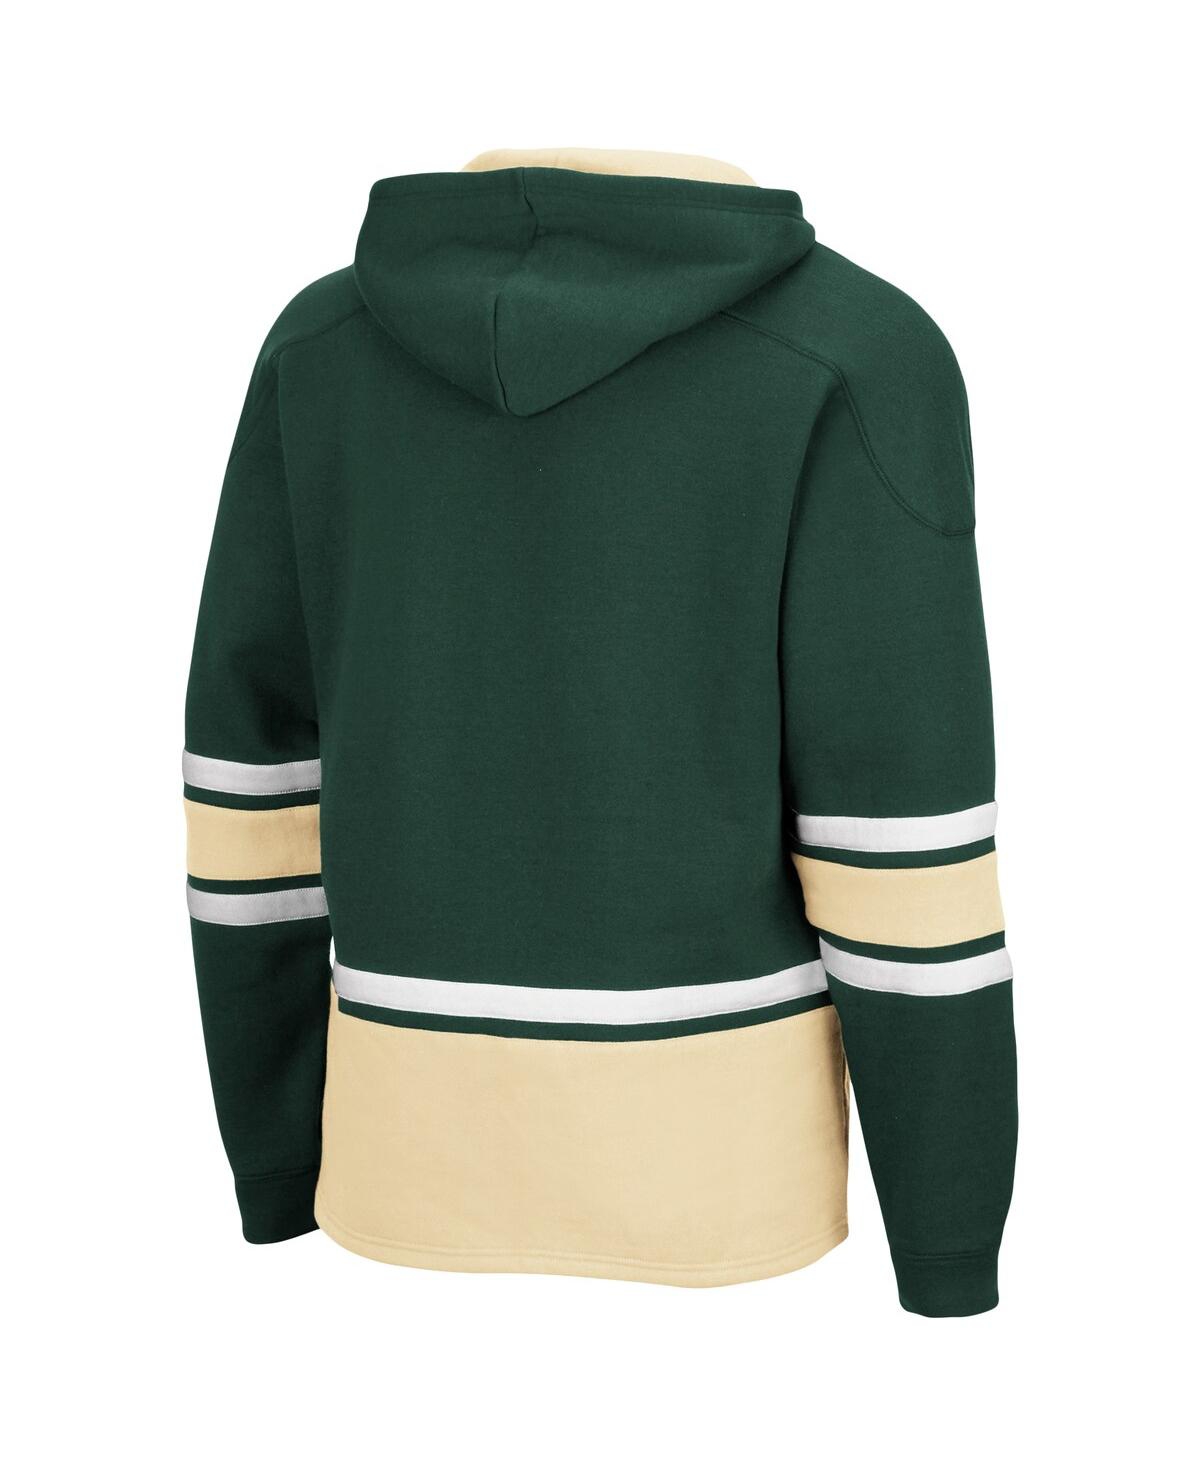 Shop Colosseum Men's  Green Colorado State Rams Lace Up 3.0 Pullover Hoodie